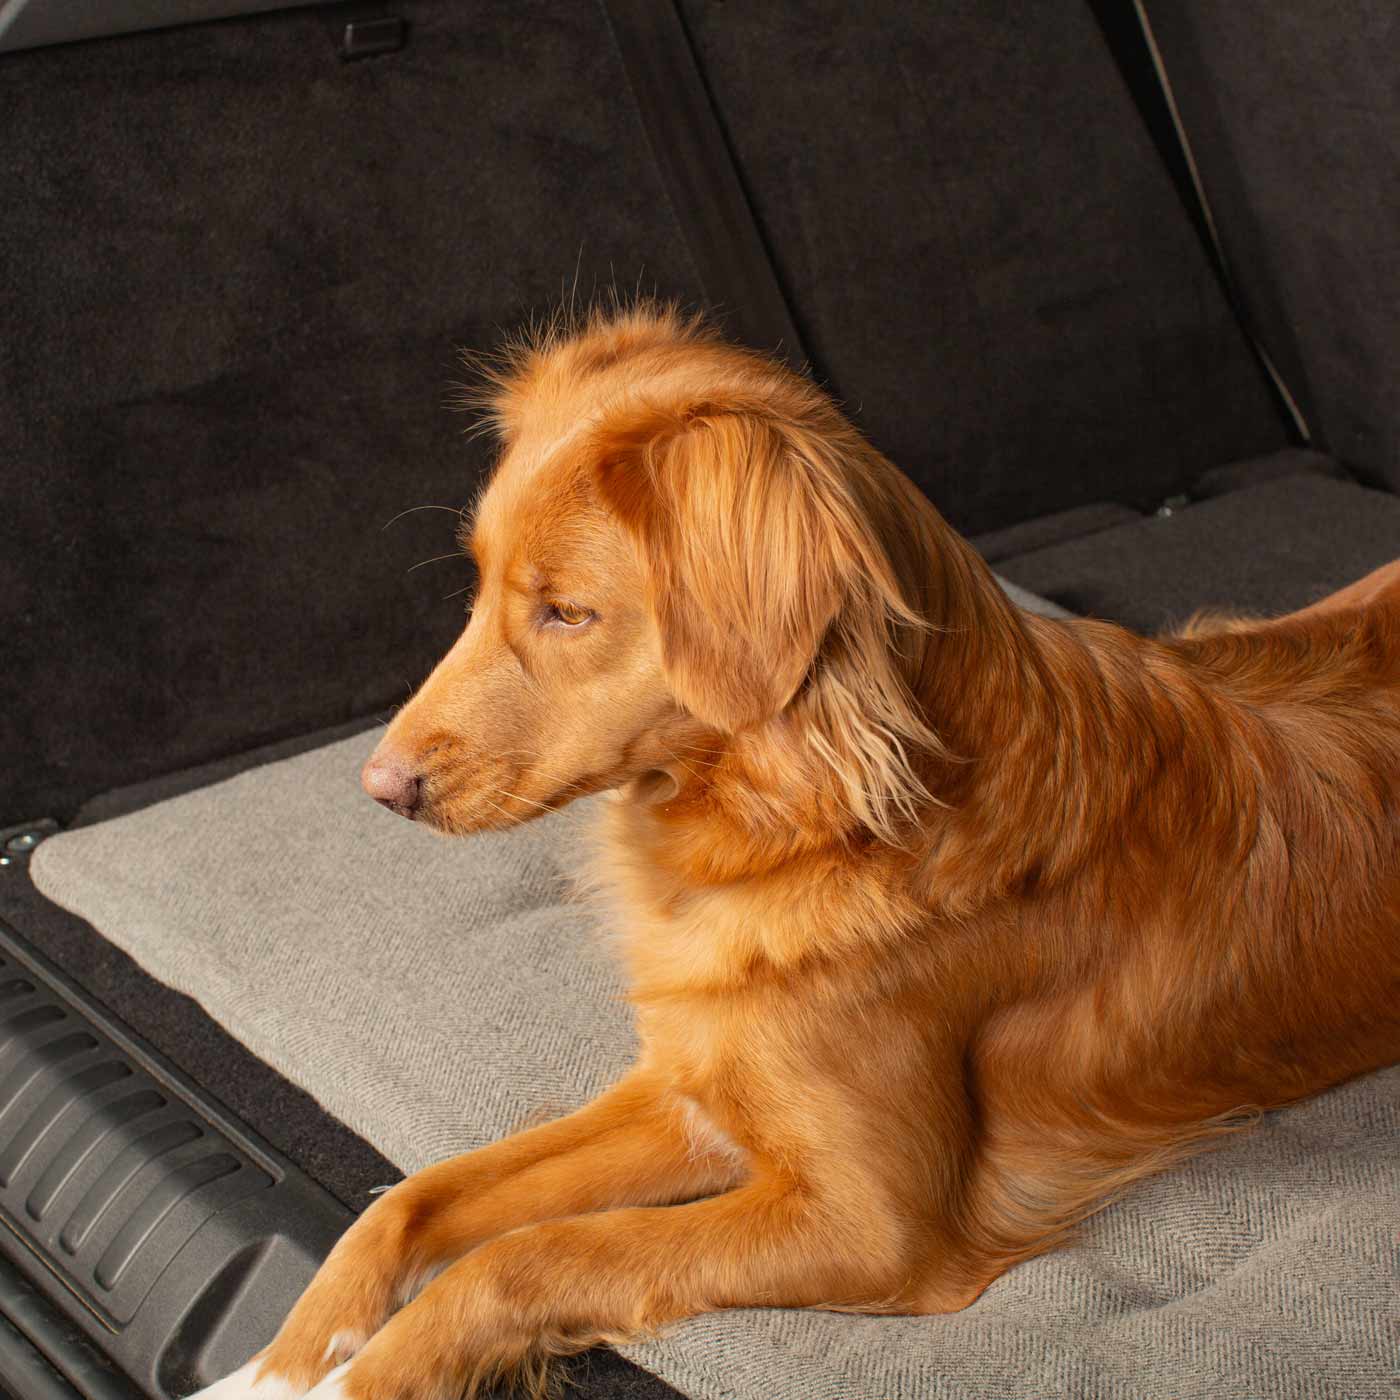 Embark on the perfect pet travel with our luxury Travel Mat in Pewter Herringbone. Featuring a Carry handle for on the move once Rolled up for easy storage, can be used as a seat cover, boot mat or travel bed! Available now at Lords & Labradors US